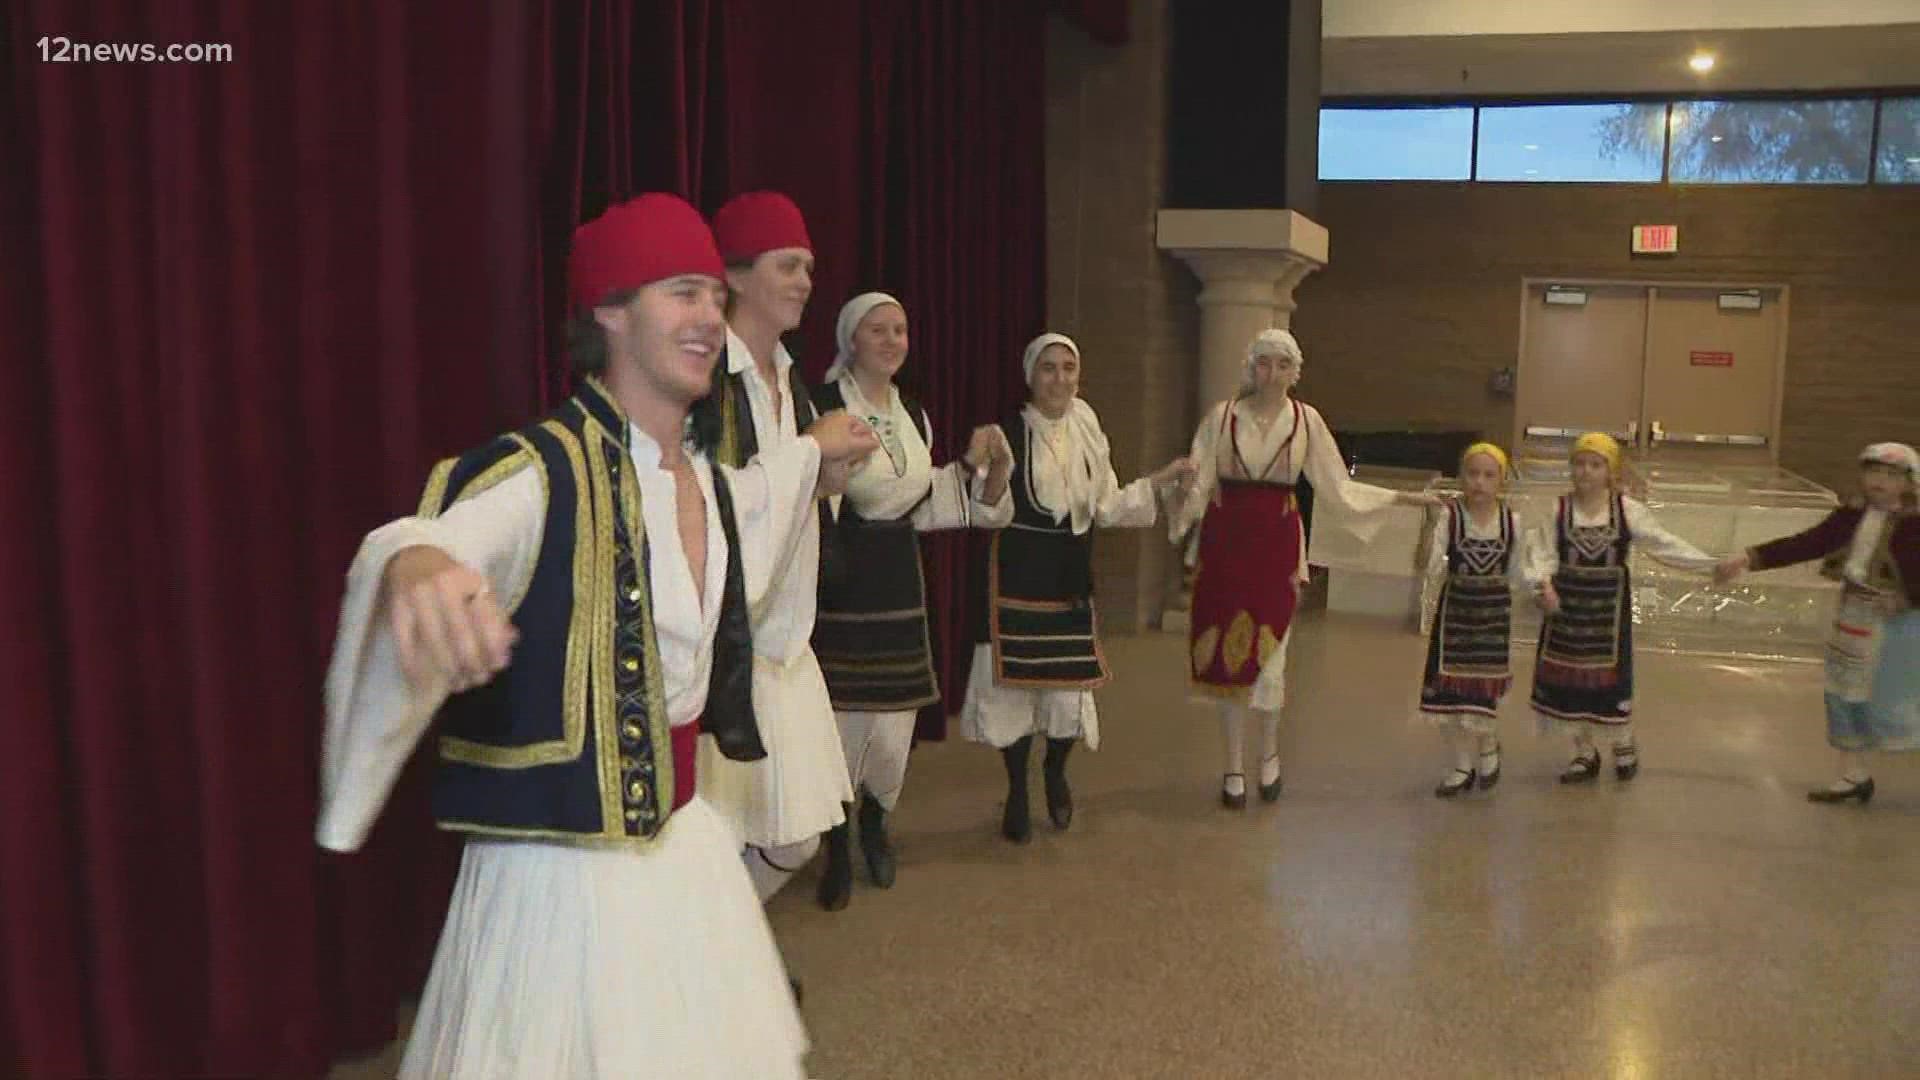 Arizona's largest Greek festival is celebrating its 60th anniversary. Join in the festivities this Friday, Oct. 8 through Sunday, Oct. 10.